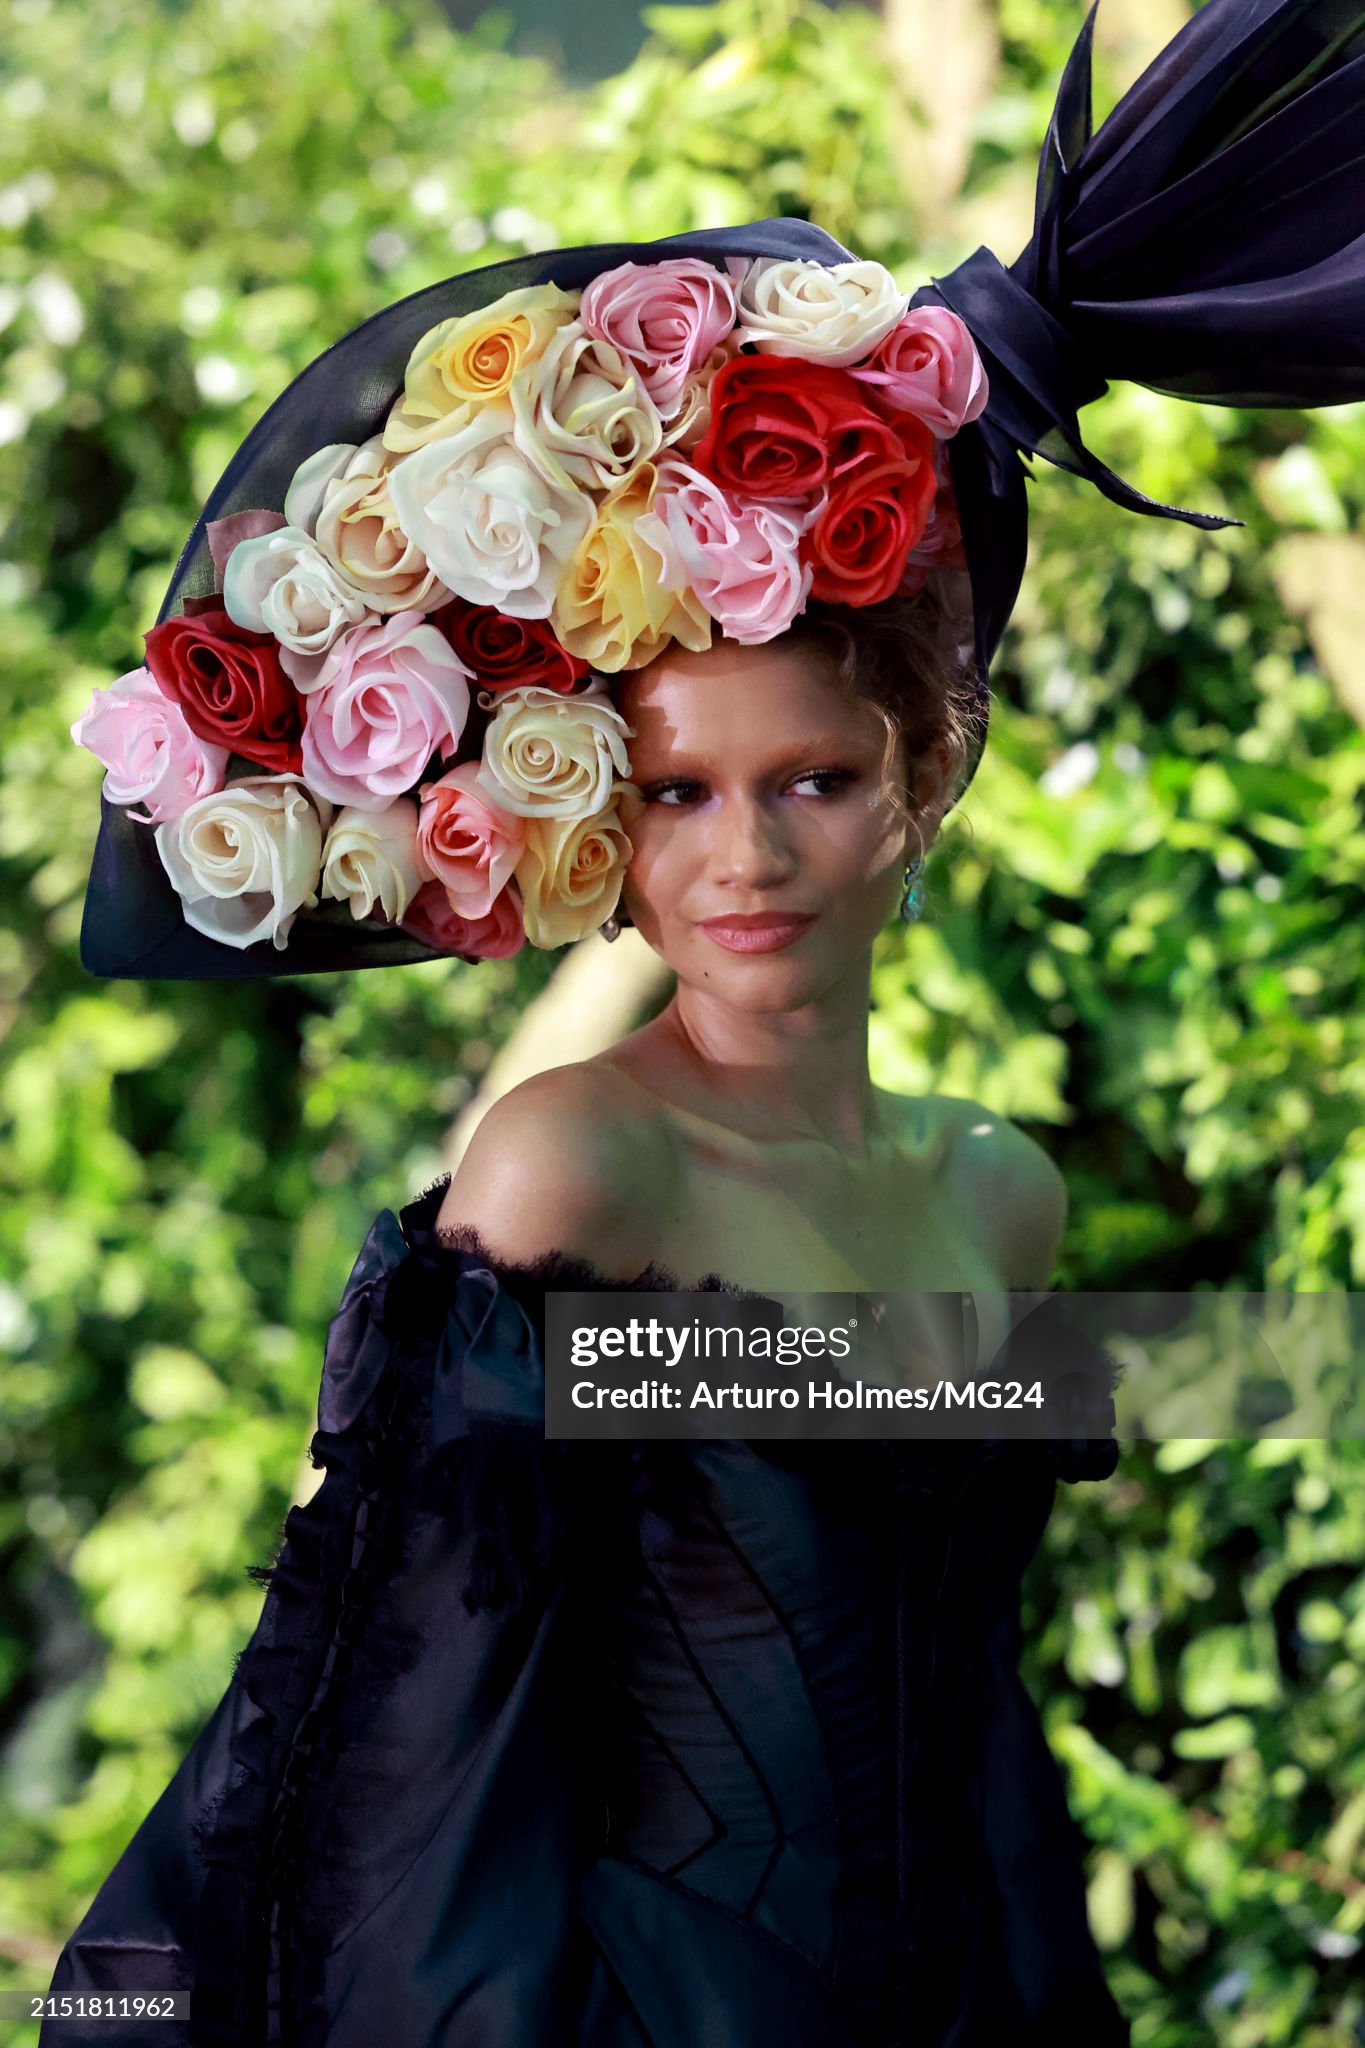 gettyimages-2151811962-2048x2048.jpg